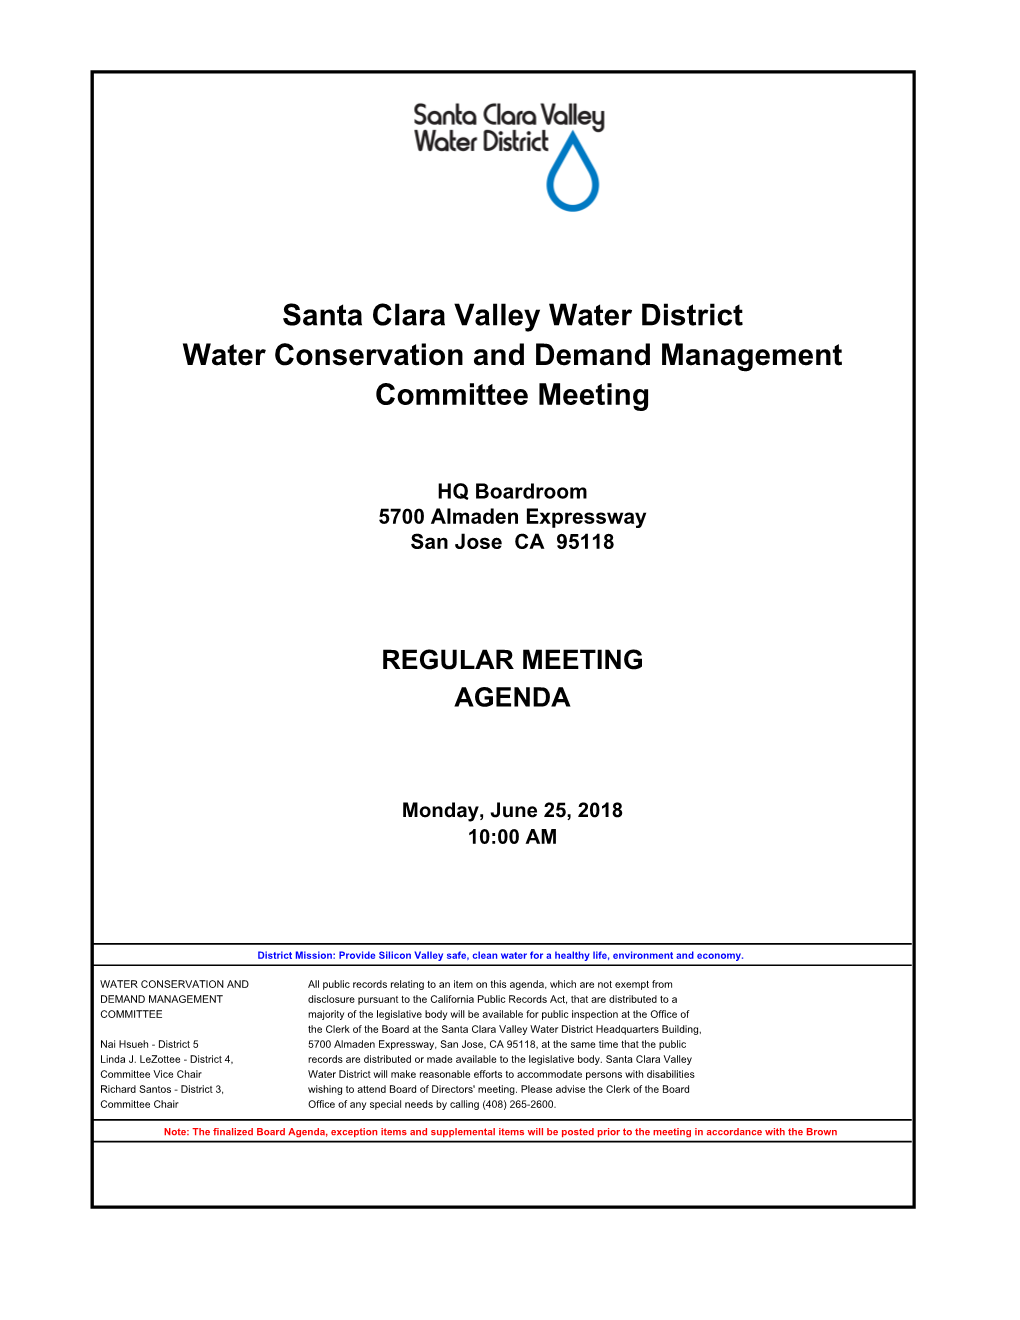 Santa Clara Valley Water District Water Conservation and Demand Management Committee Meeting